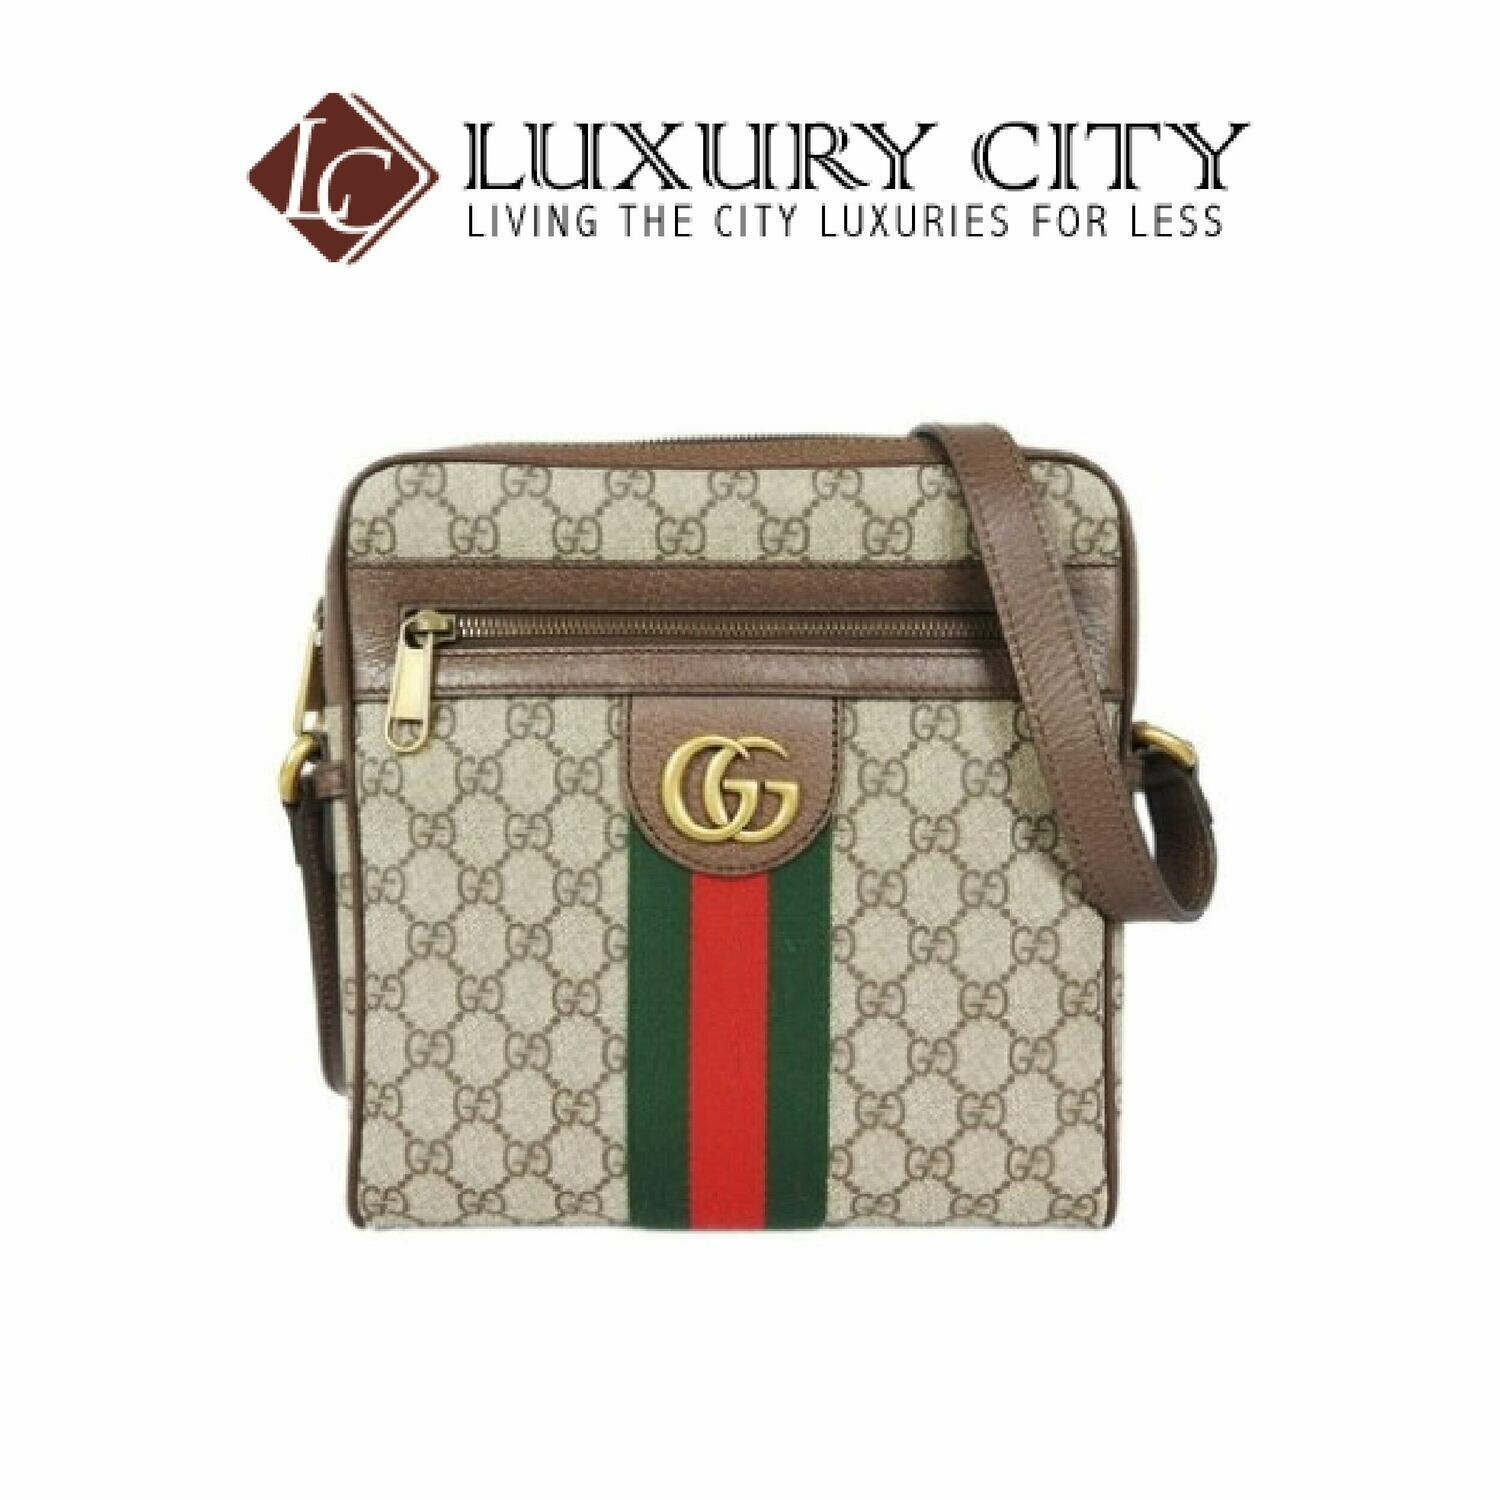 [Luxury City] Gucci Ophidia GG Small Messenger Bag Light Brown/Sand Gucci- 547926